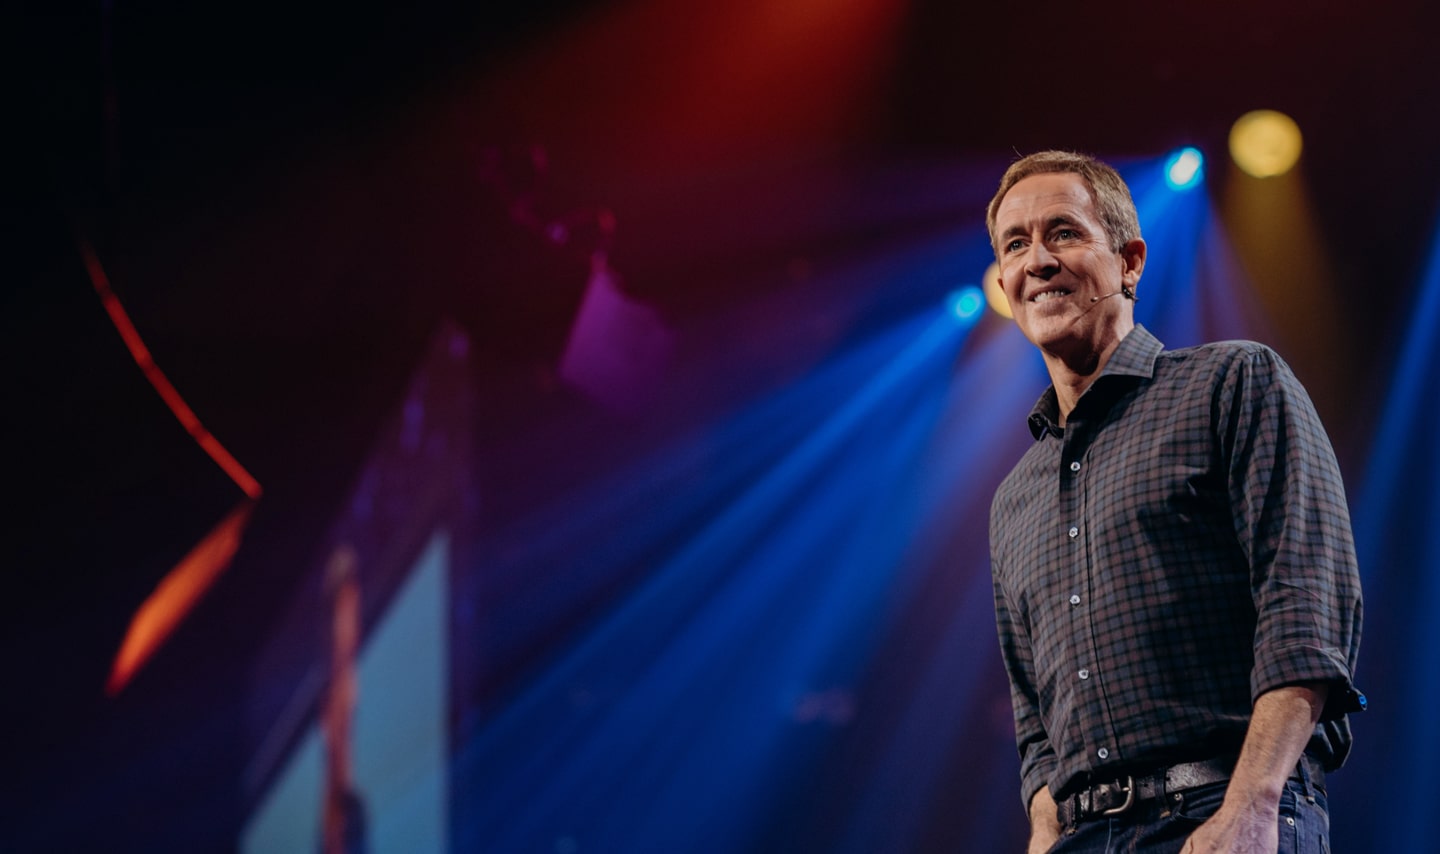 Image from: https://andystanley.com/about/